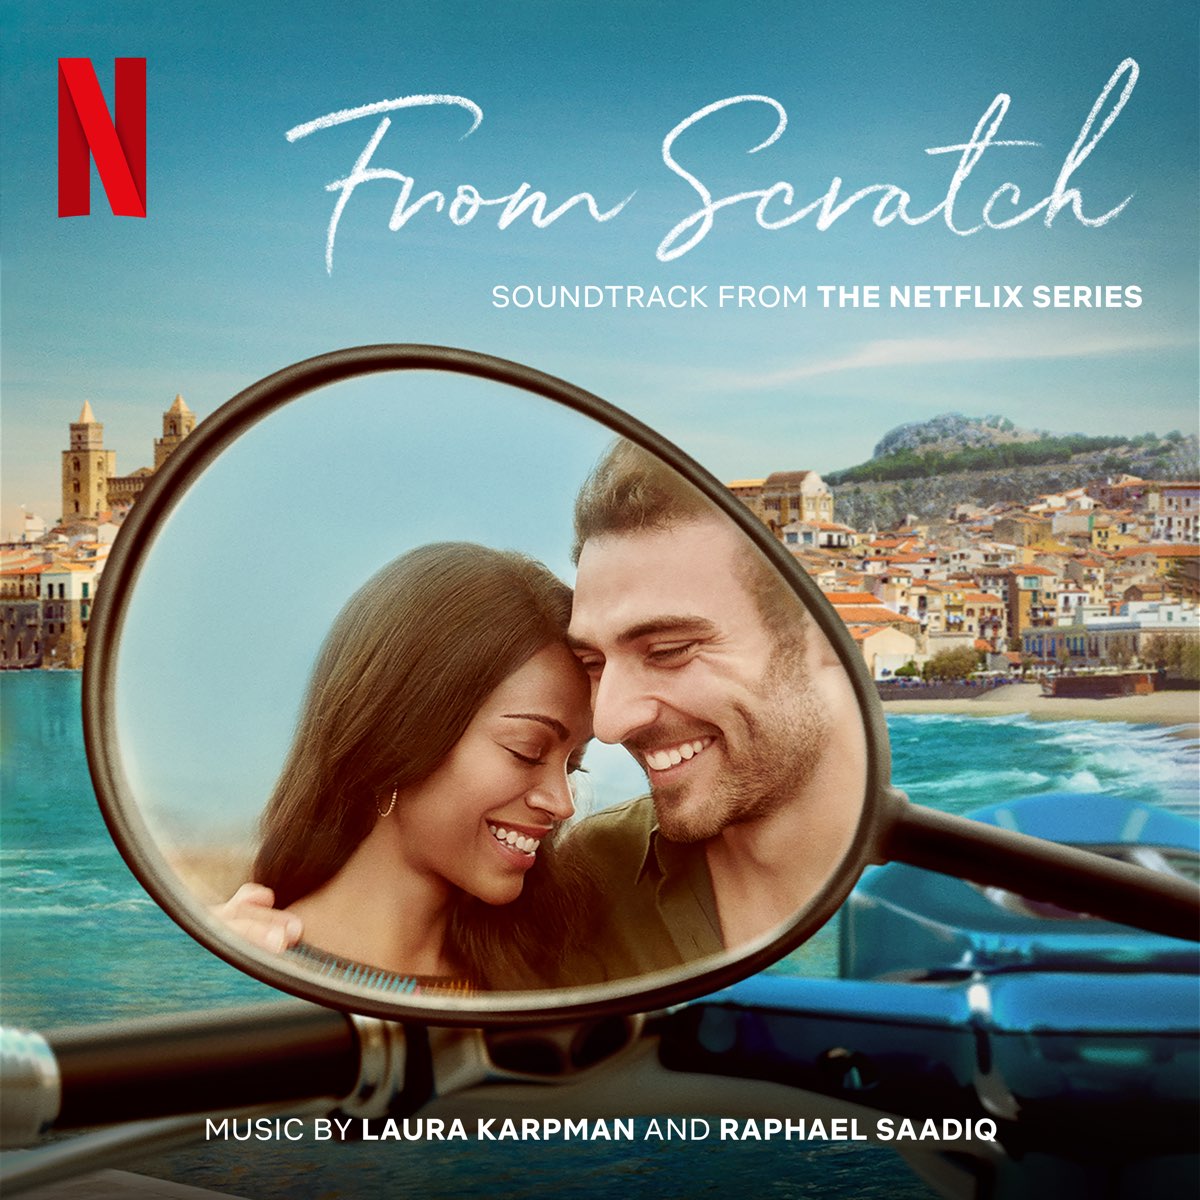 From Scratch (Soundtrack from the Netflix Series) - Album by Laura